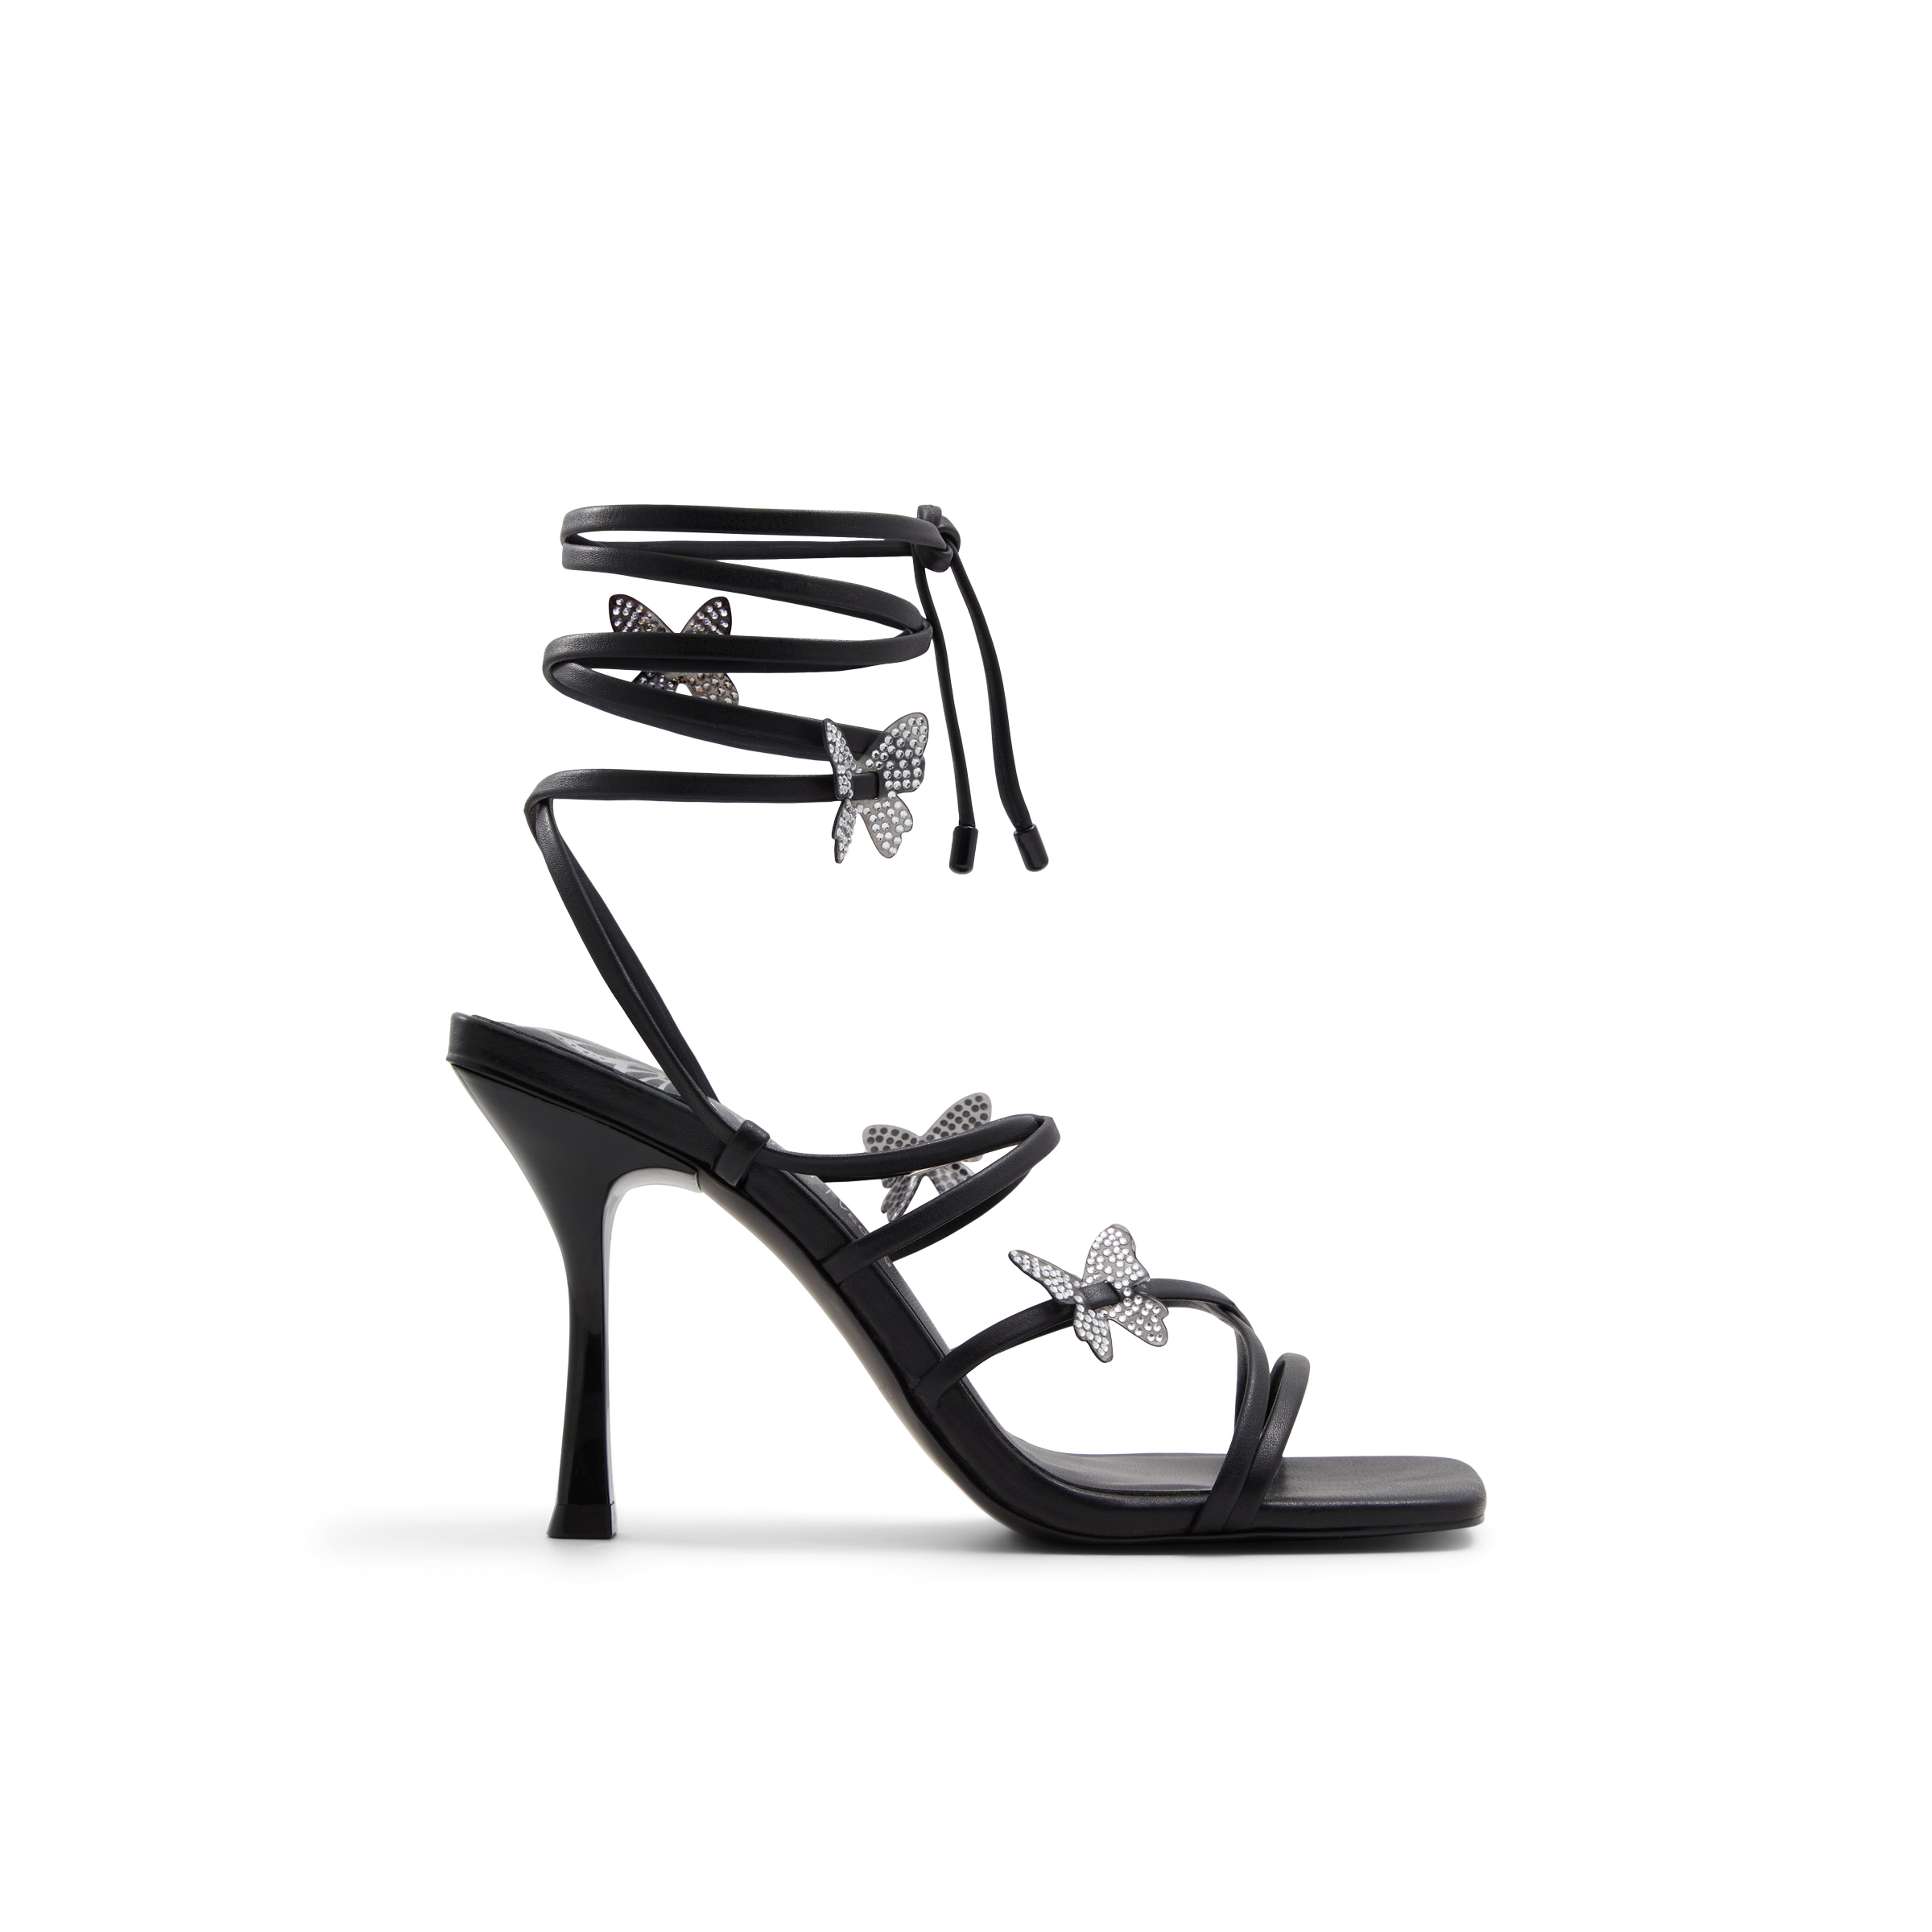 Flutterby High heel lace up sandals